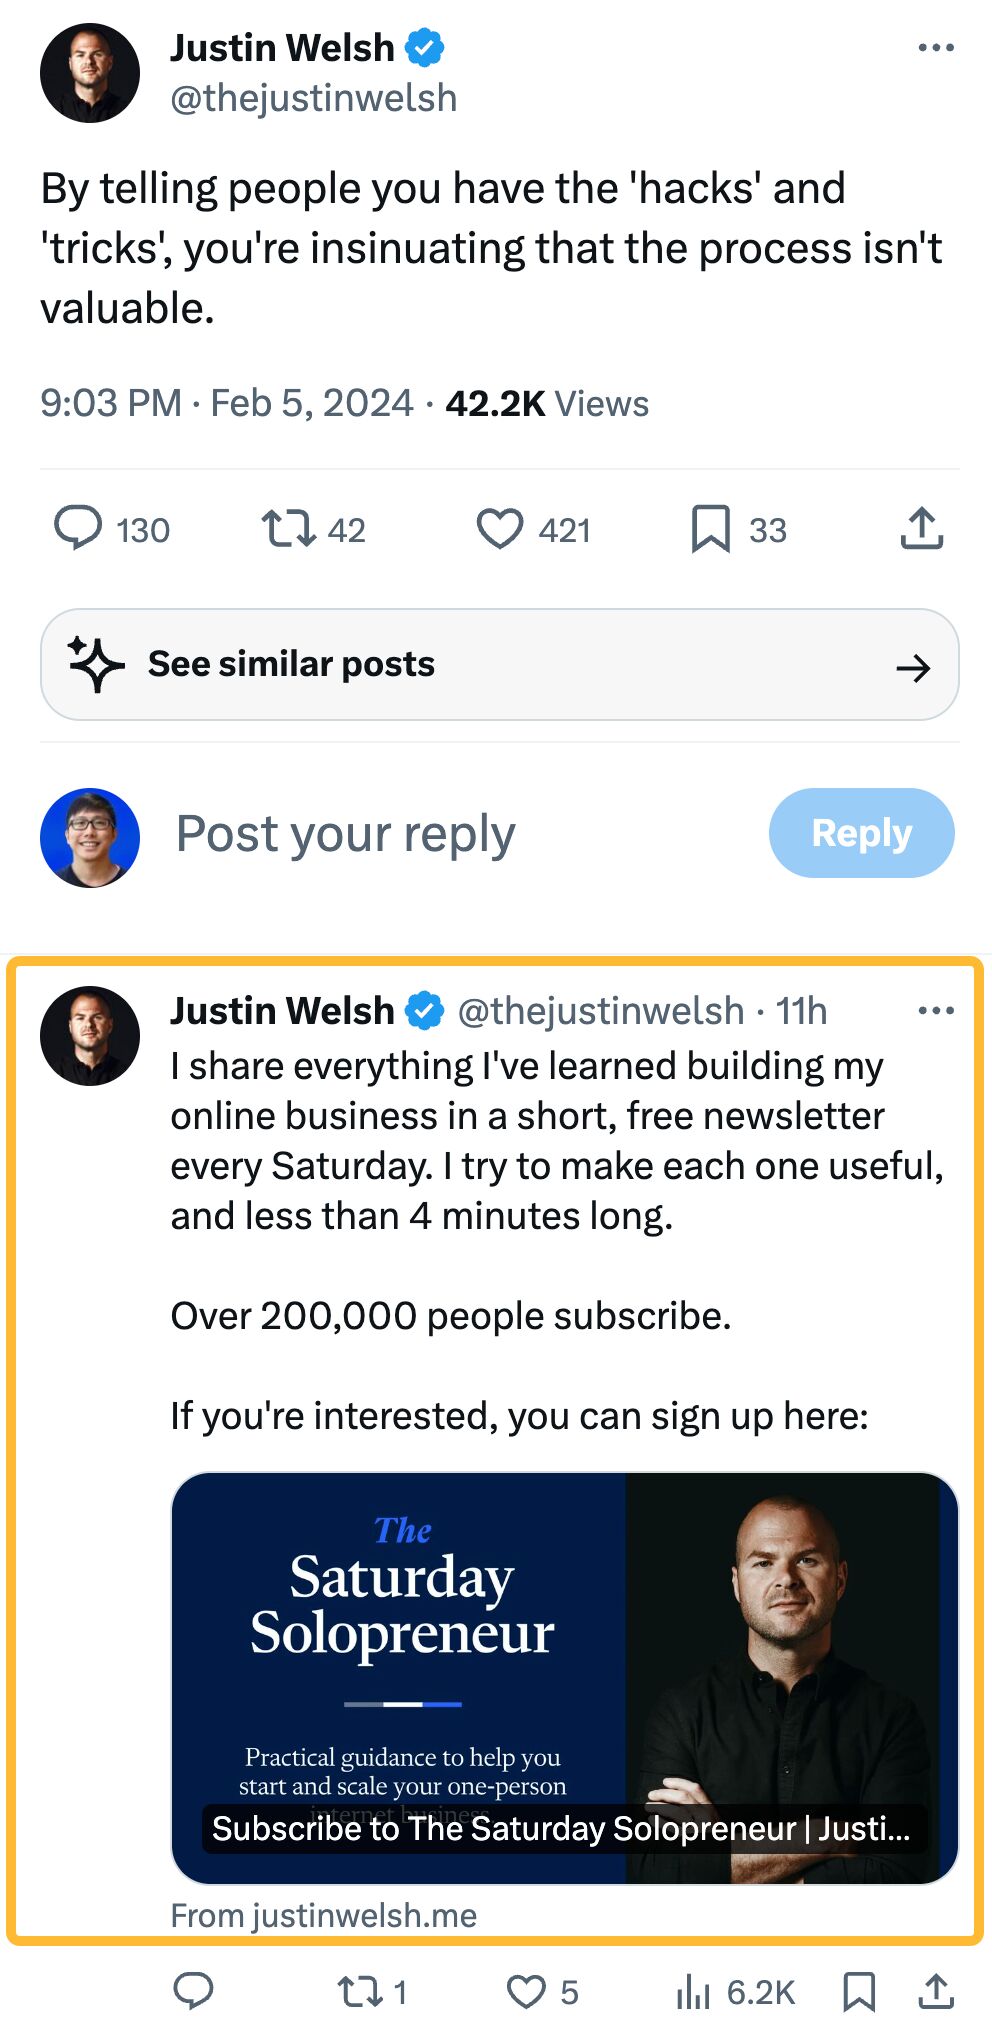 Tweet from Justin Welsh asking people to subscribe to his newsletter